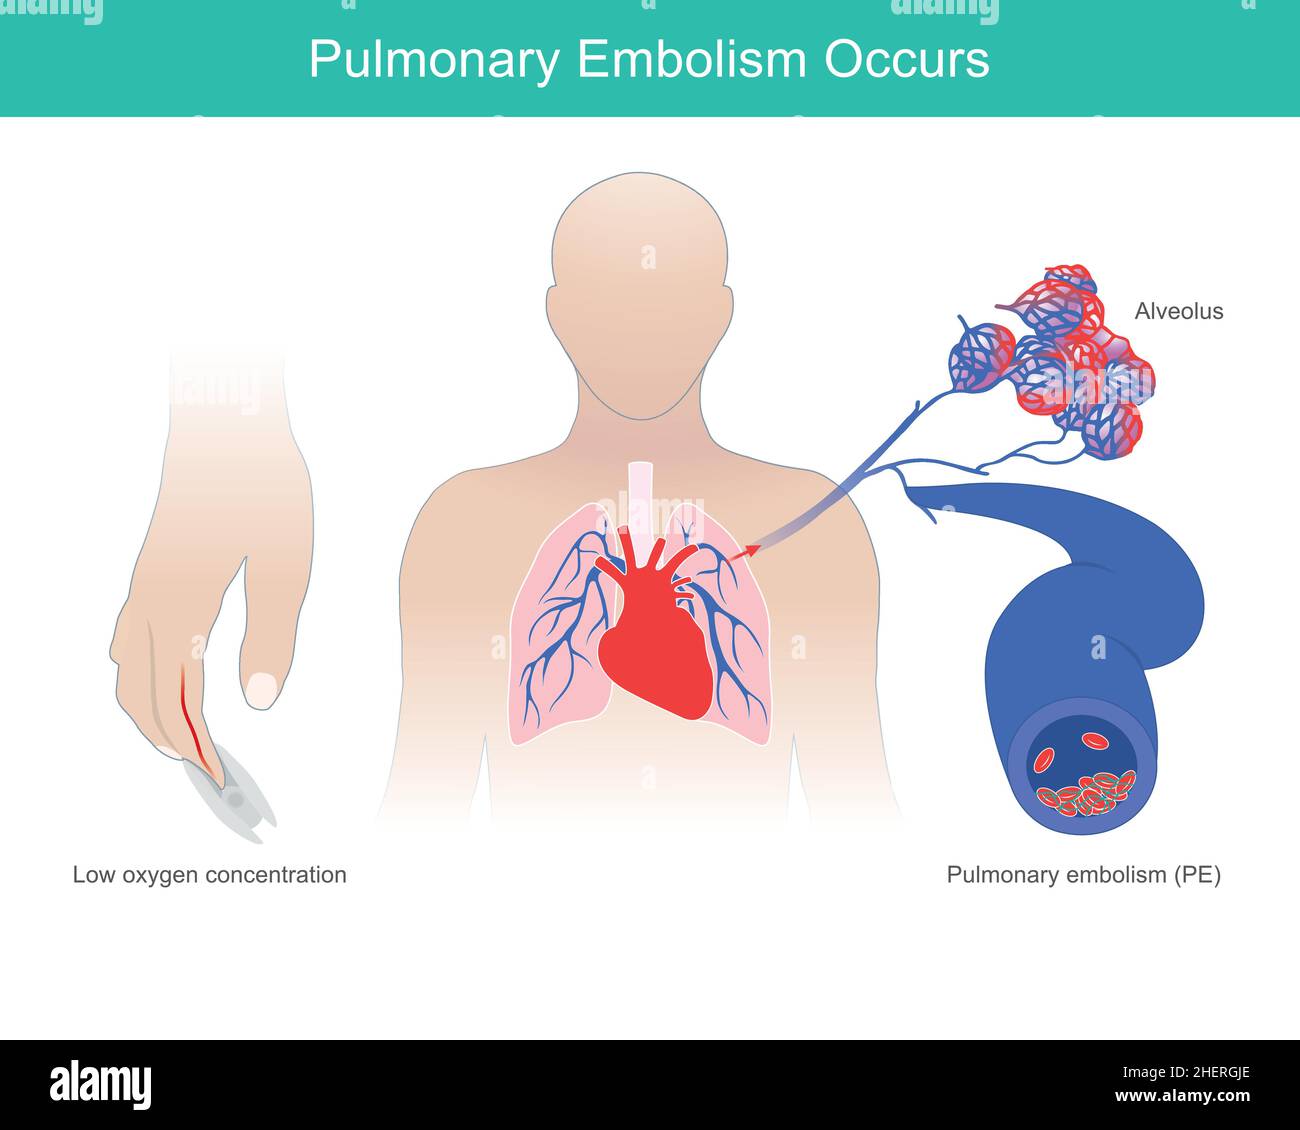 Pulmonary Embolism Occurs. Abnormal condition of lower level oxygen in blood cause from pulmonary embolism occur. Stock Vector